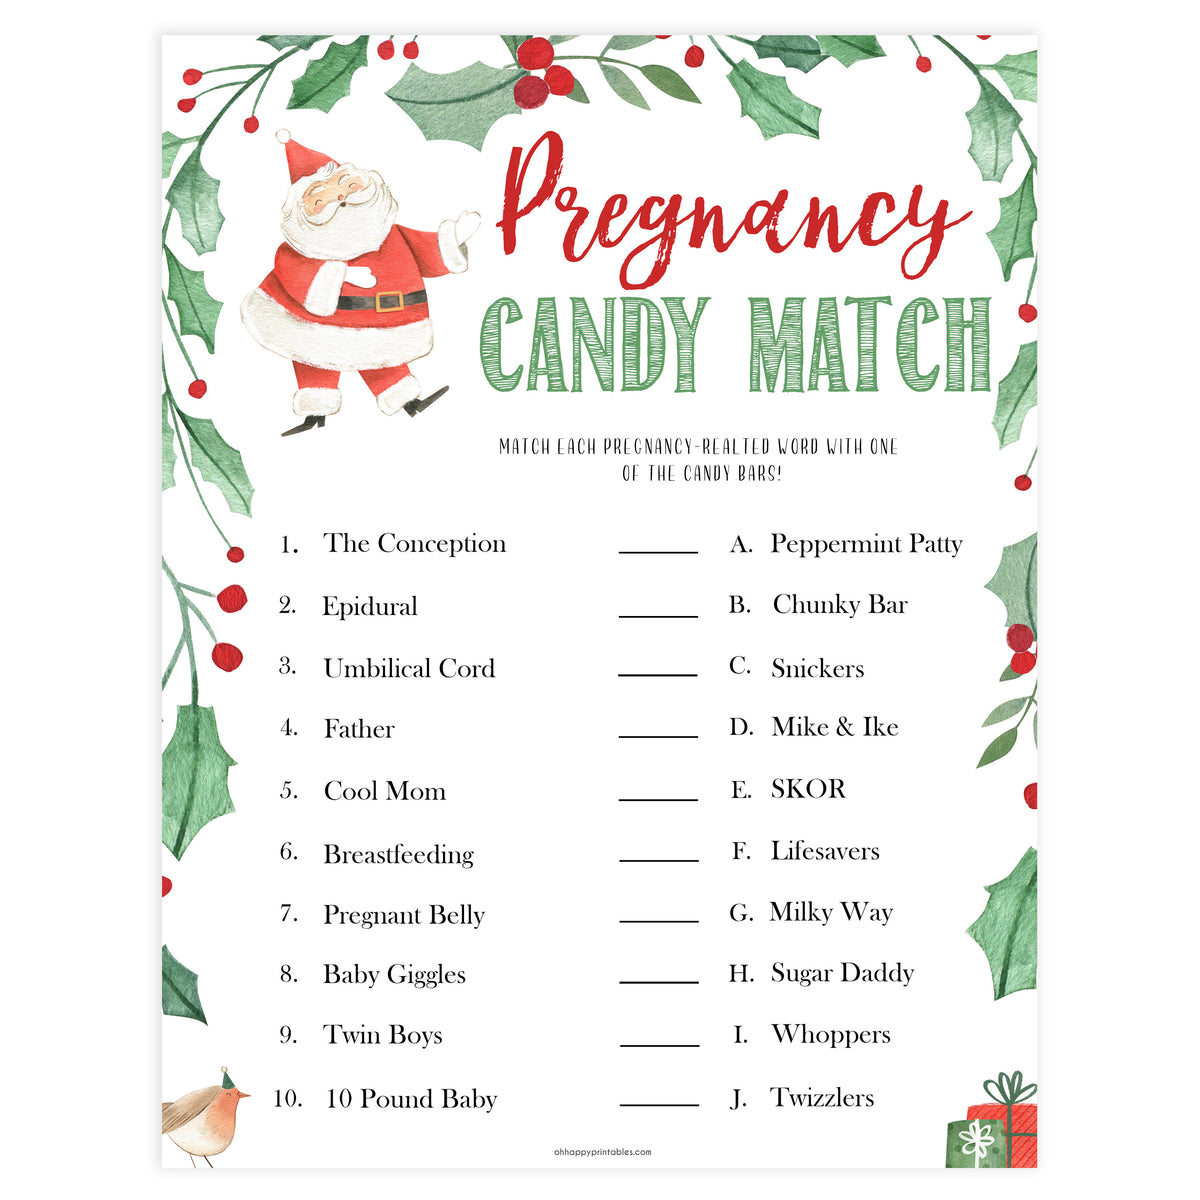 Christmas baby shower games, pregnancy candy match, festive baby shower games, best baby shower games, top 10 baby games, baby shower ideas, baby shower games